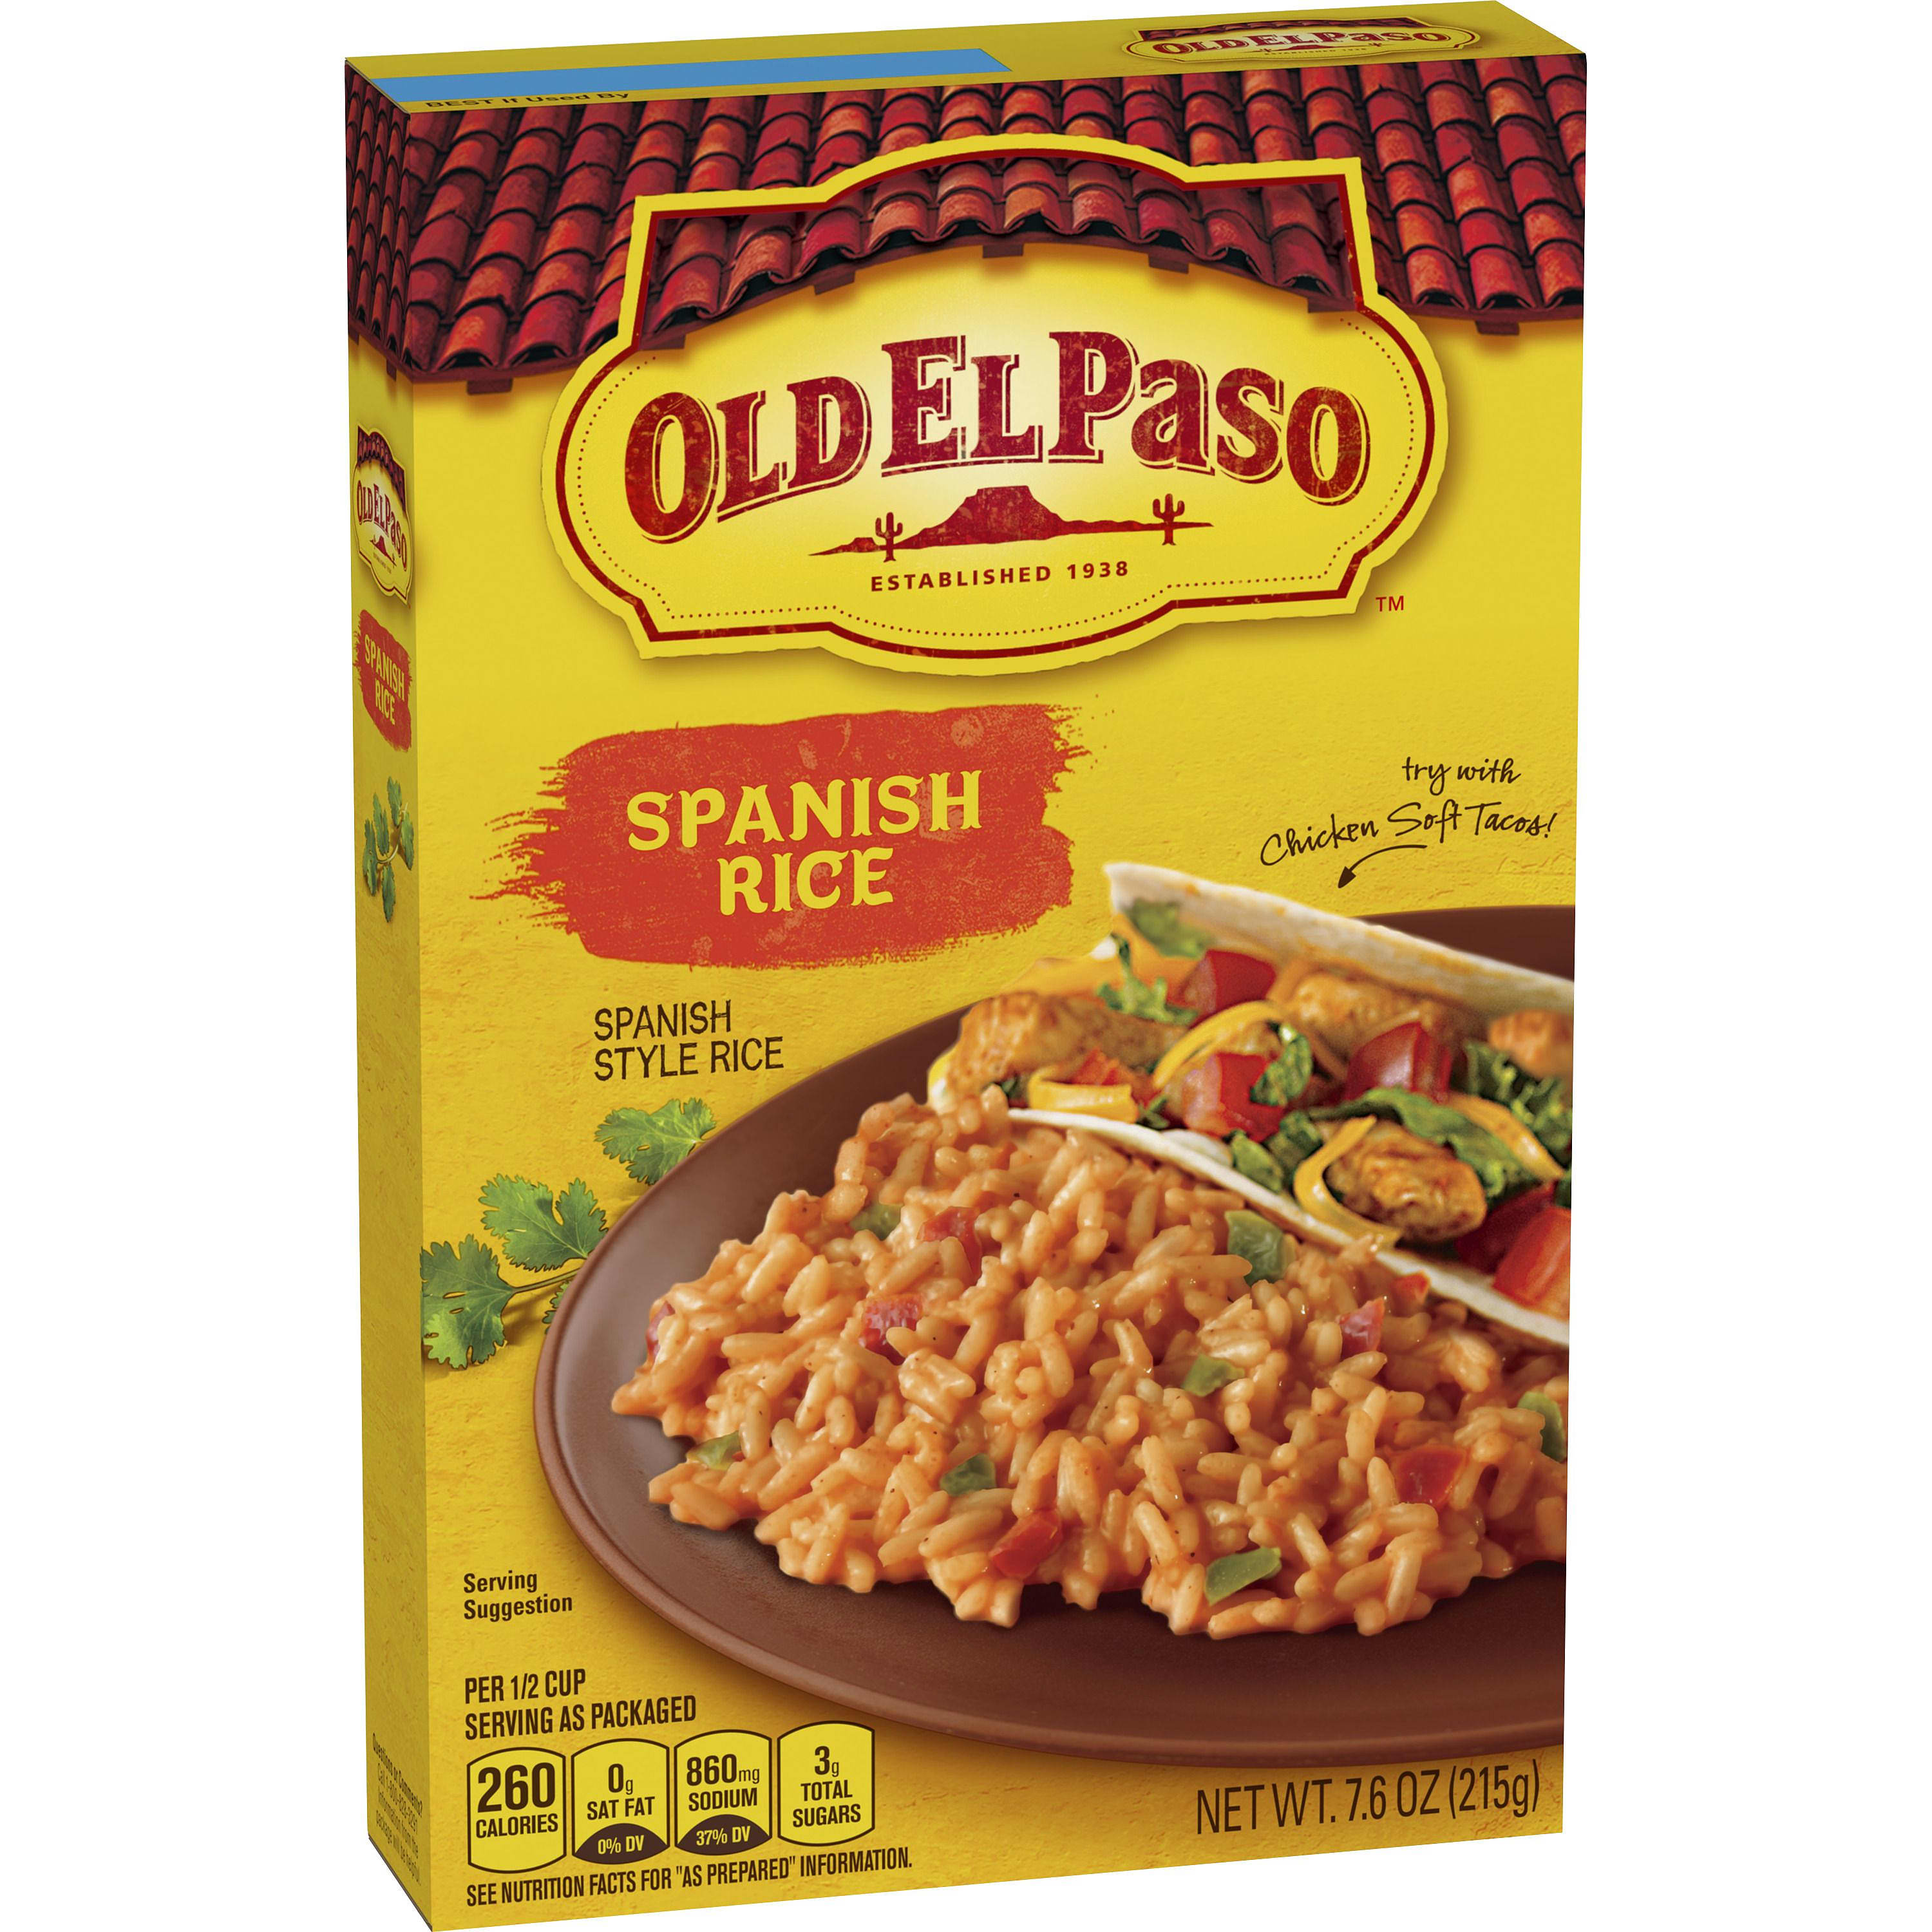 Old El Paso has declared May the 'Month of Mexican' and we're